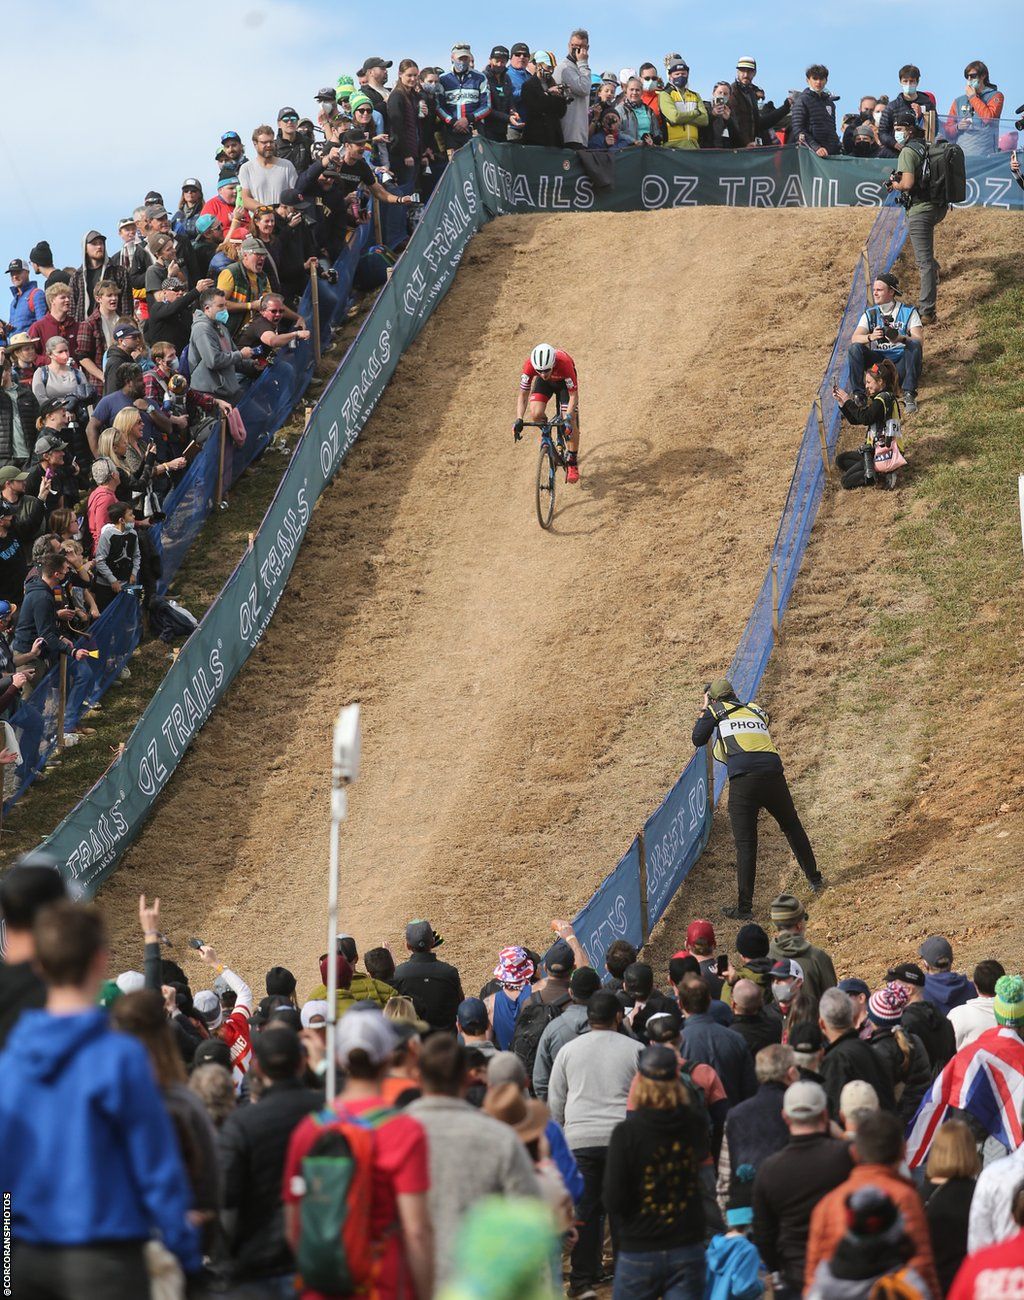 Felipe Nystrom descends a slope while competing at a cyclocross event